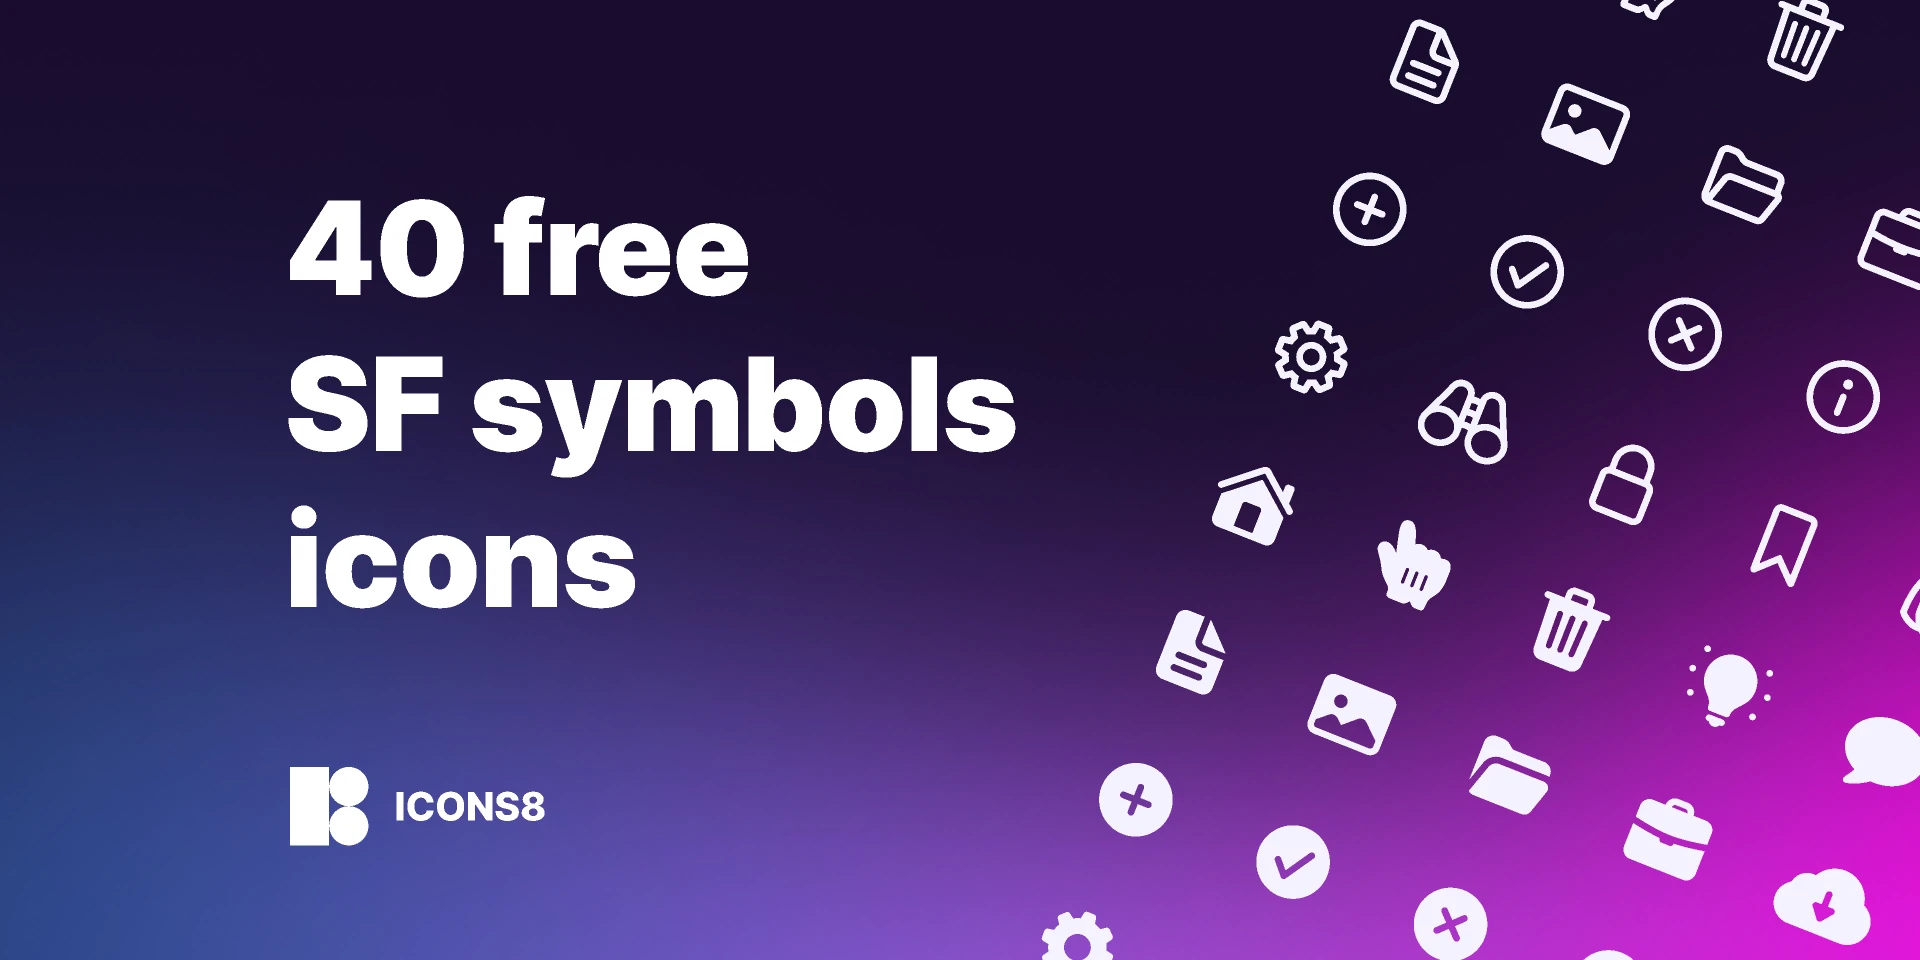 40 Free SF symbols icons for Figma and Adobe XD